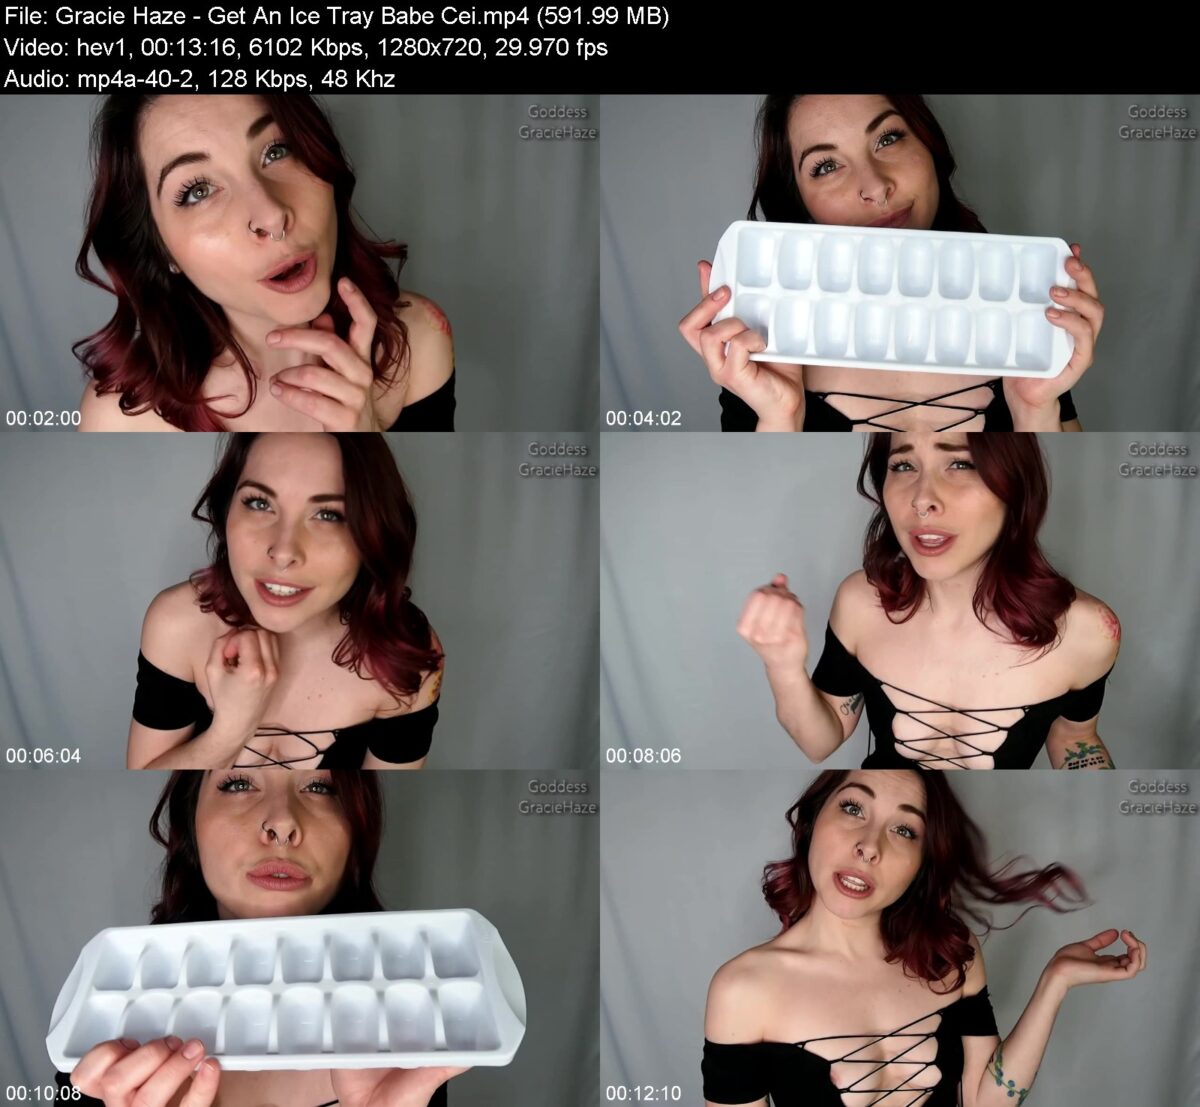 Gracie Haze in Get An Ice Tray Babe Cei